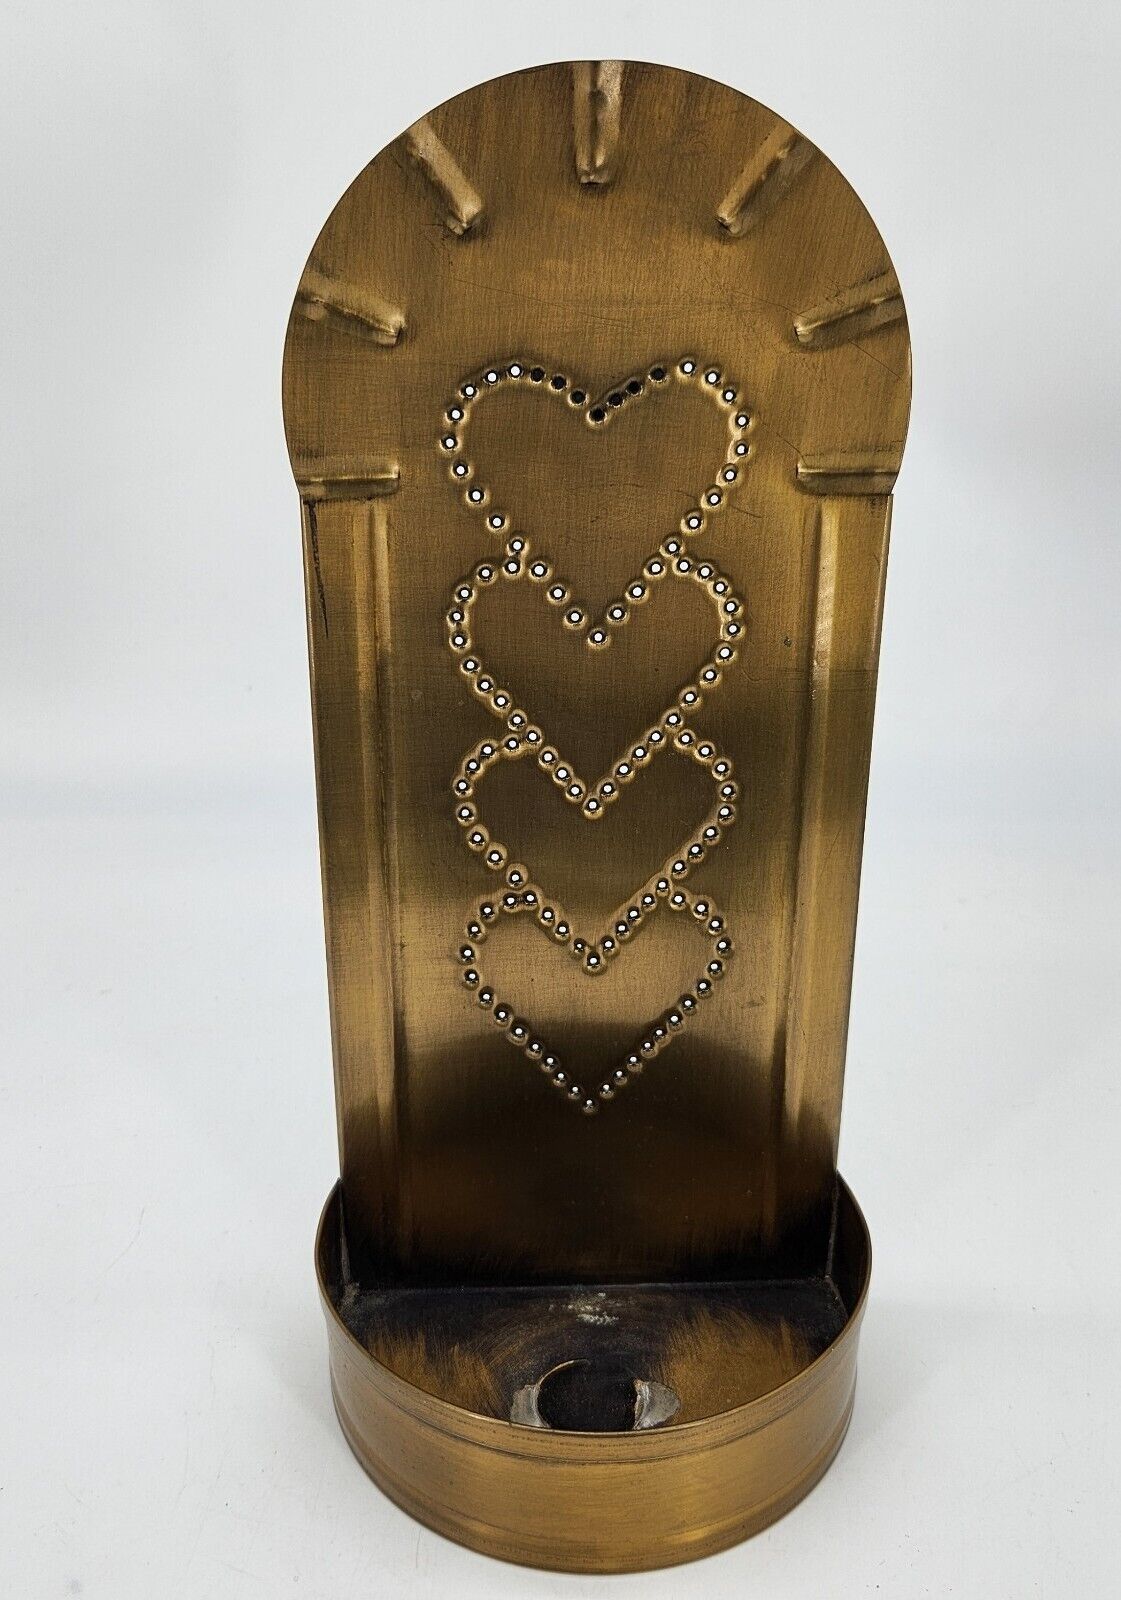 Irvin's Tinware Metal Candle Wall Fixture Colonial Punched Heart Brass Pattern